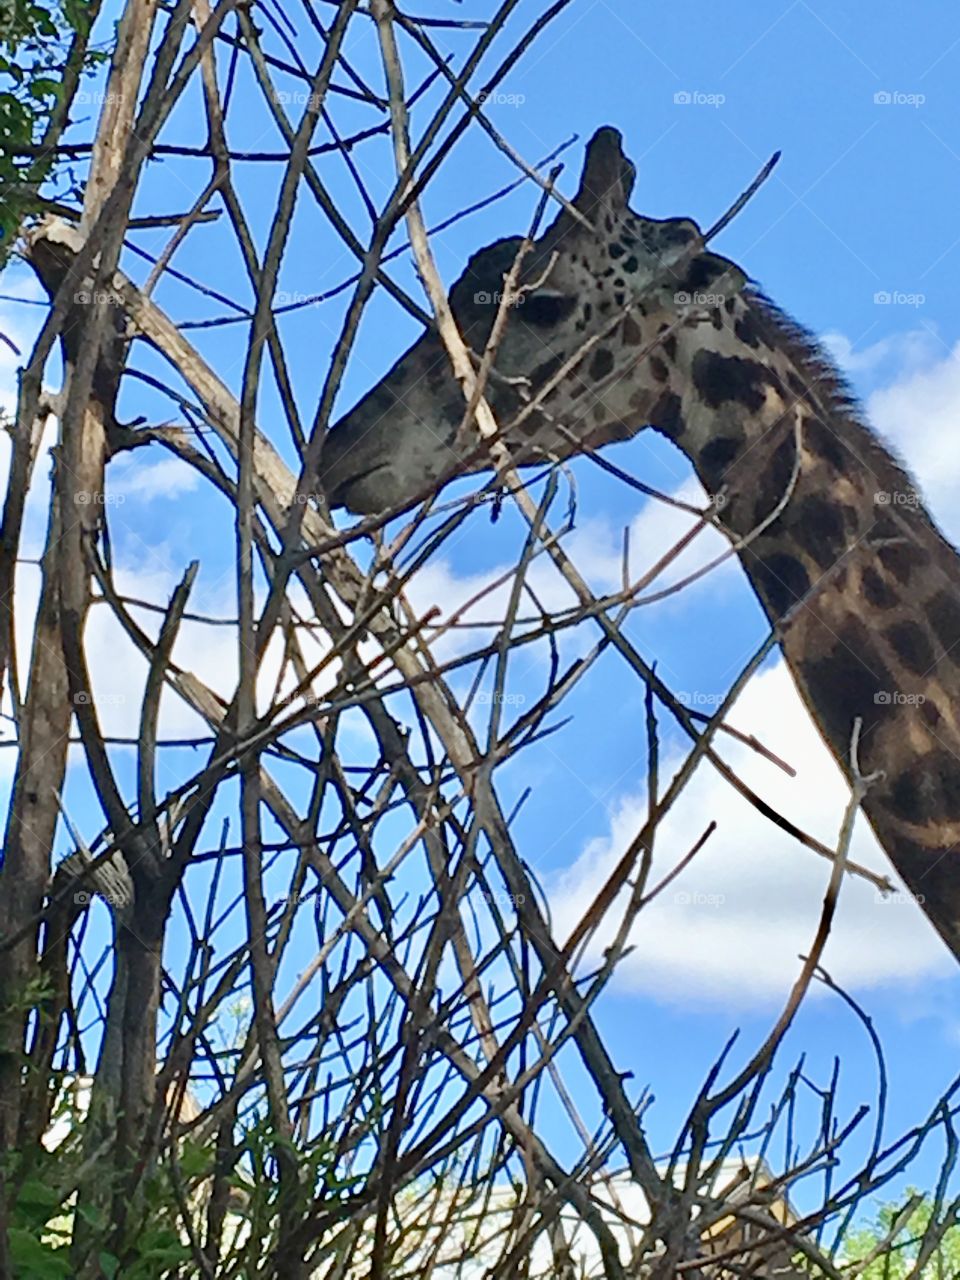 Giraffe reaching for leaves among the branches.